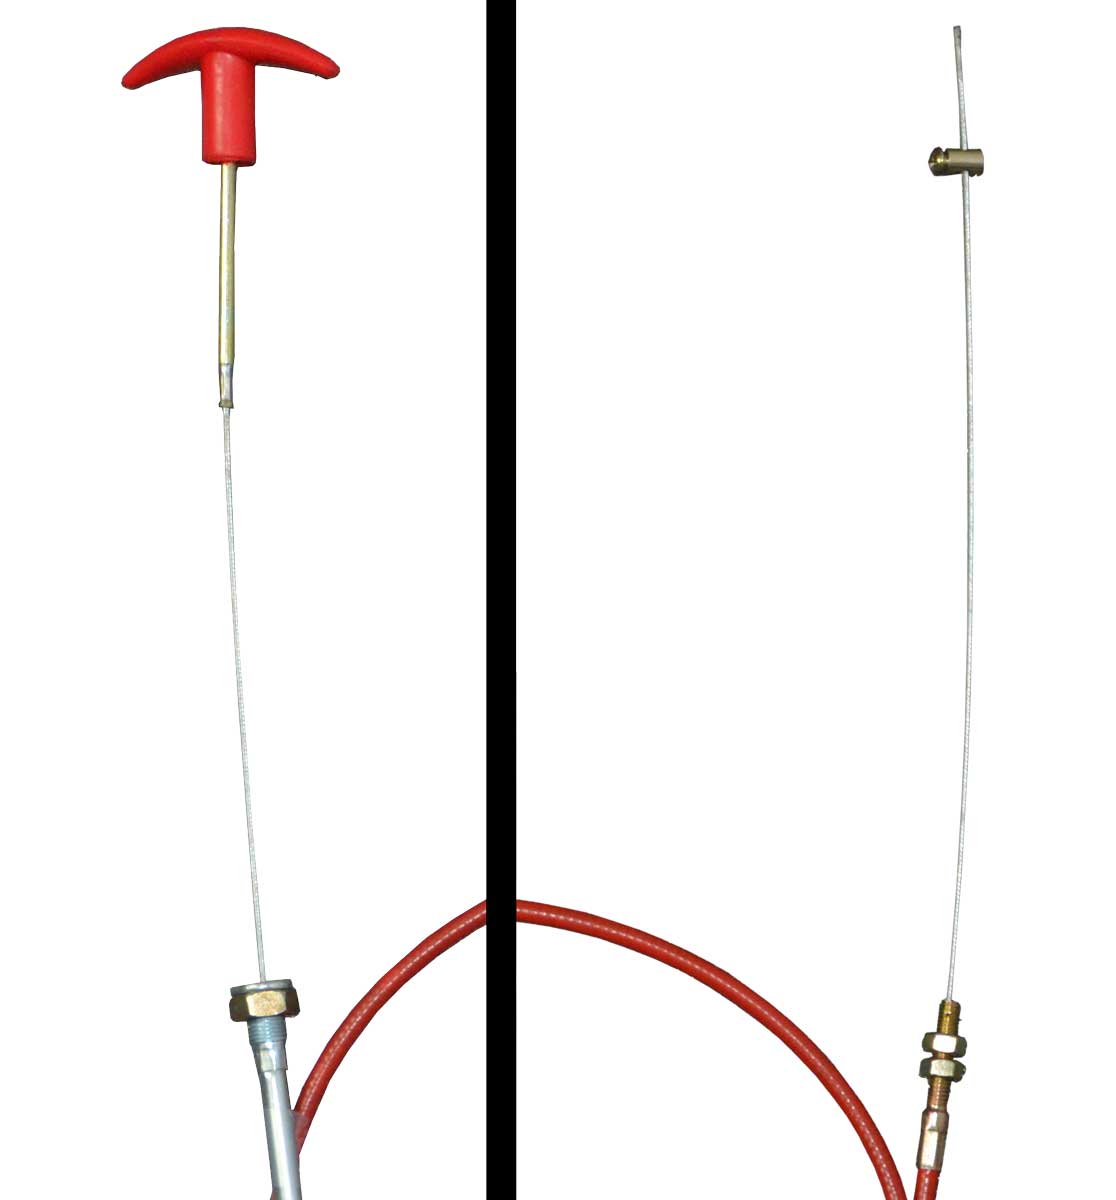 STR Pull Cable for Isolator / Fire Extinguisher